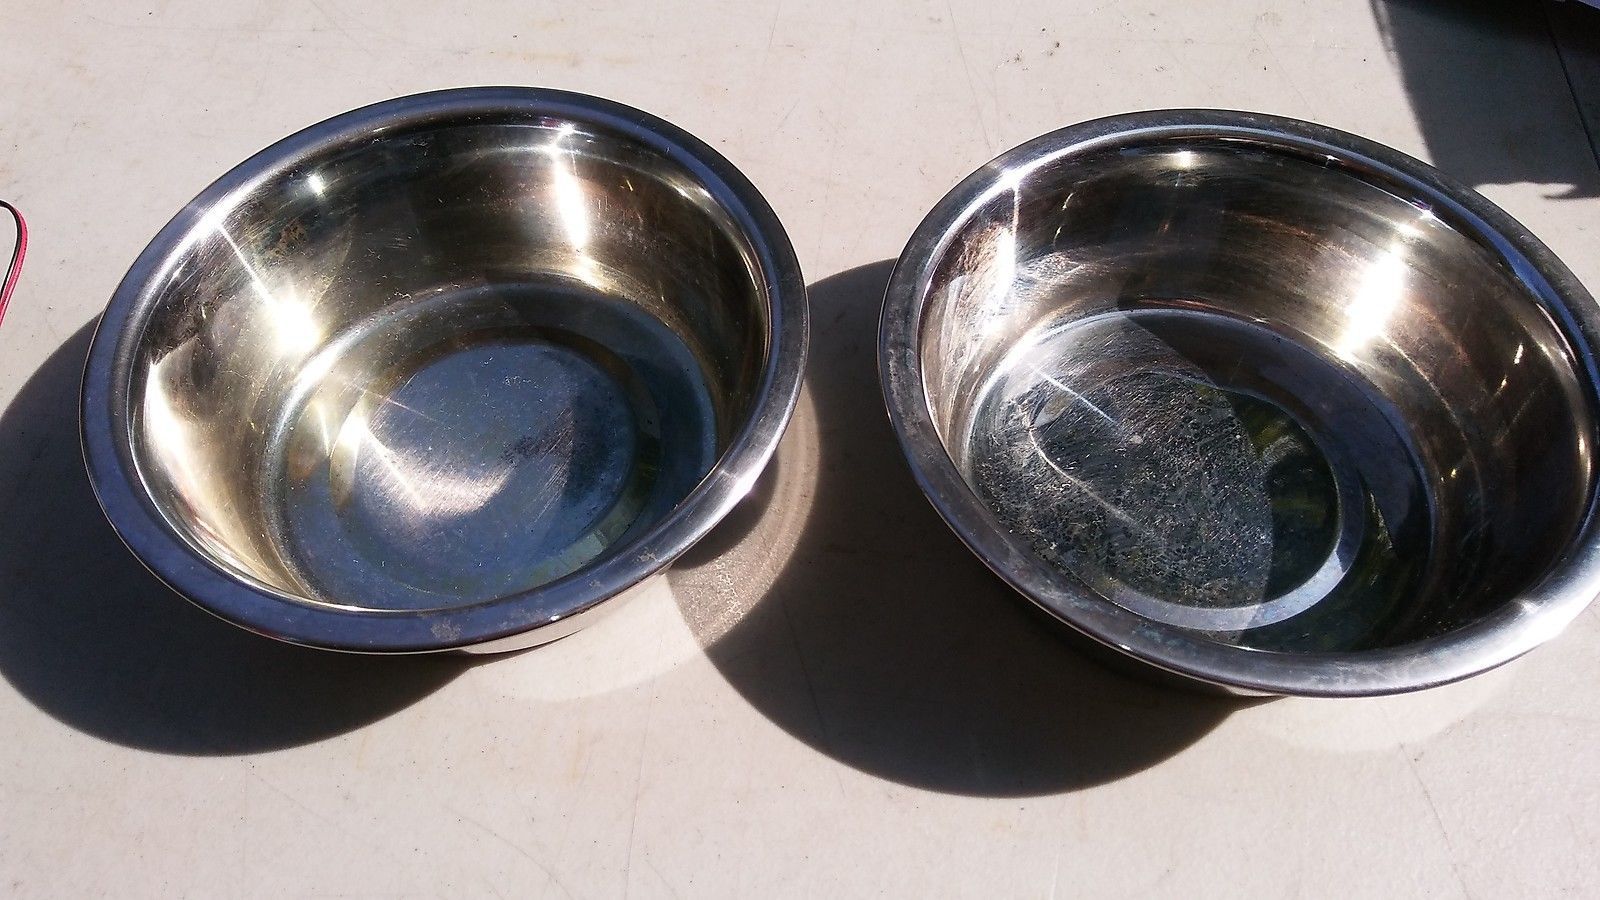 7ZZ34 PAIR OF STAINLESS STEEL DISHES, 8-1/2" X 2-5/8" X 7-1/2", GOOD CONDITION - $21.29